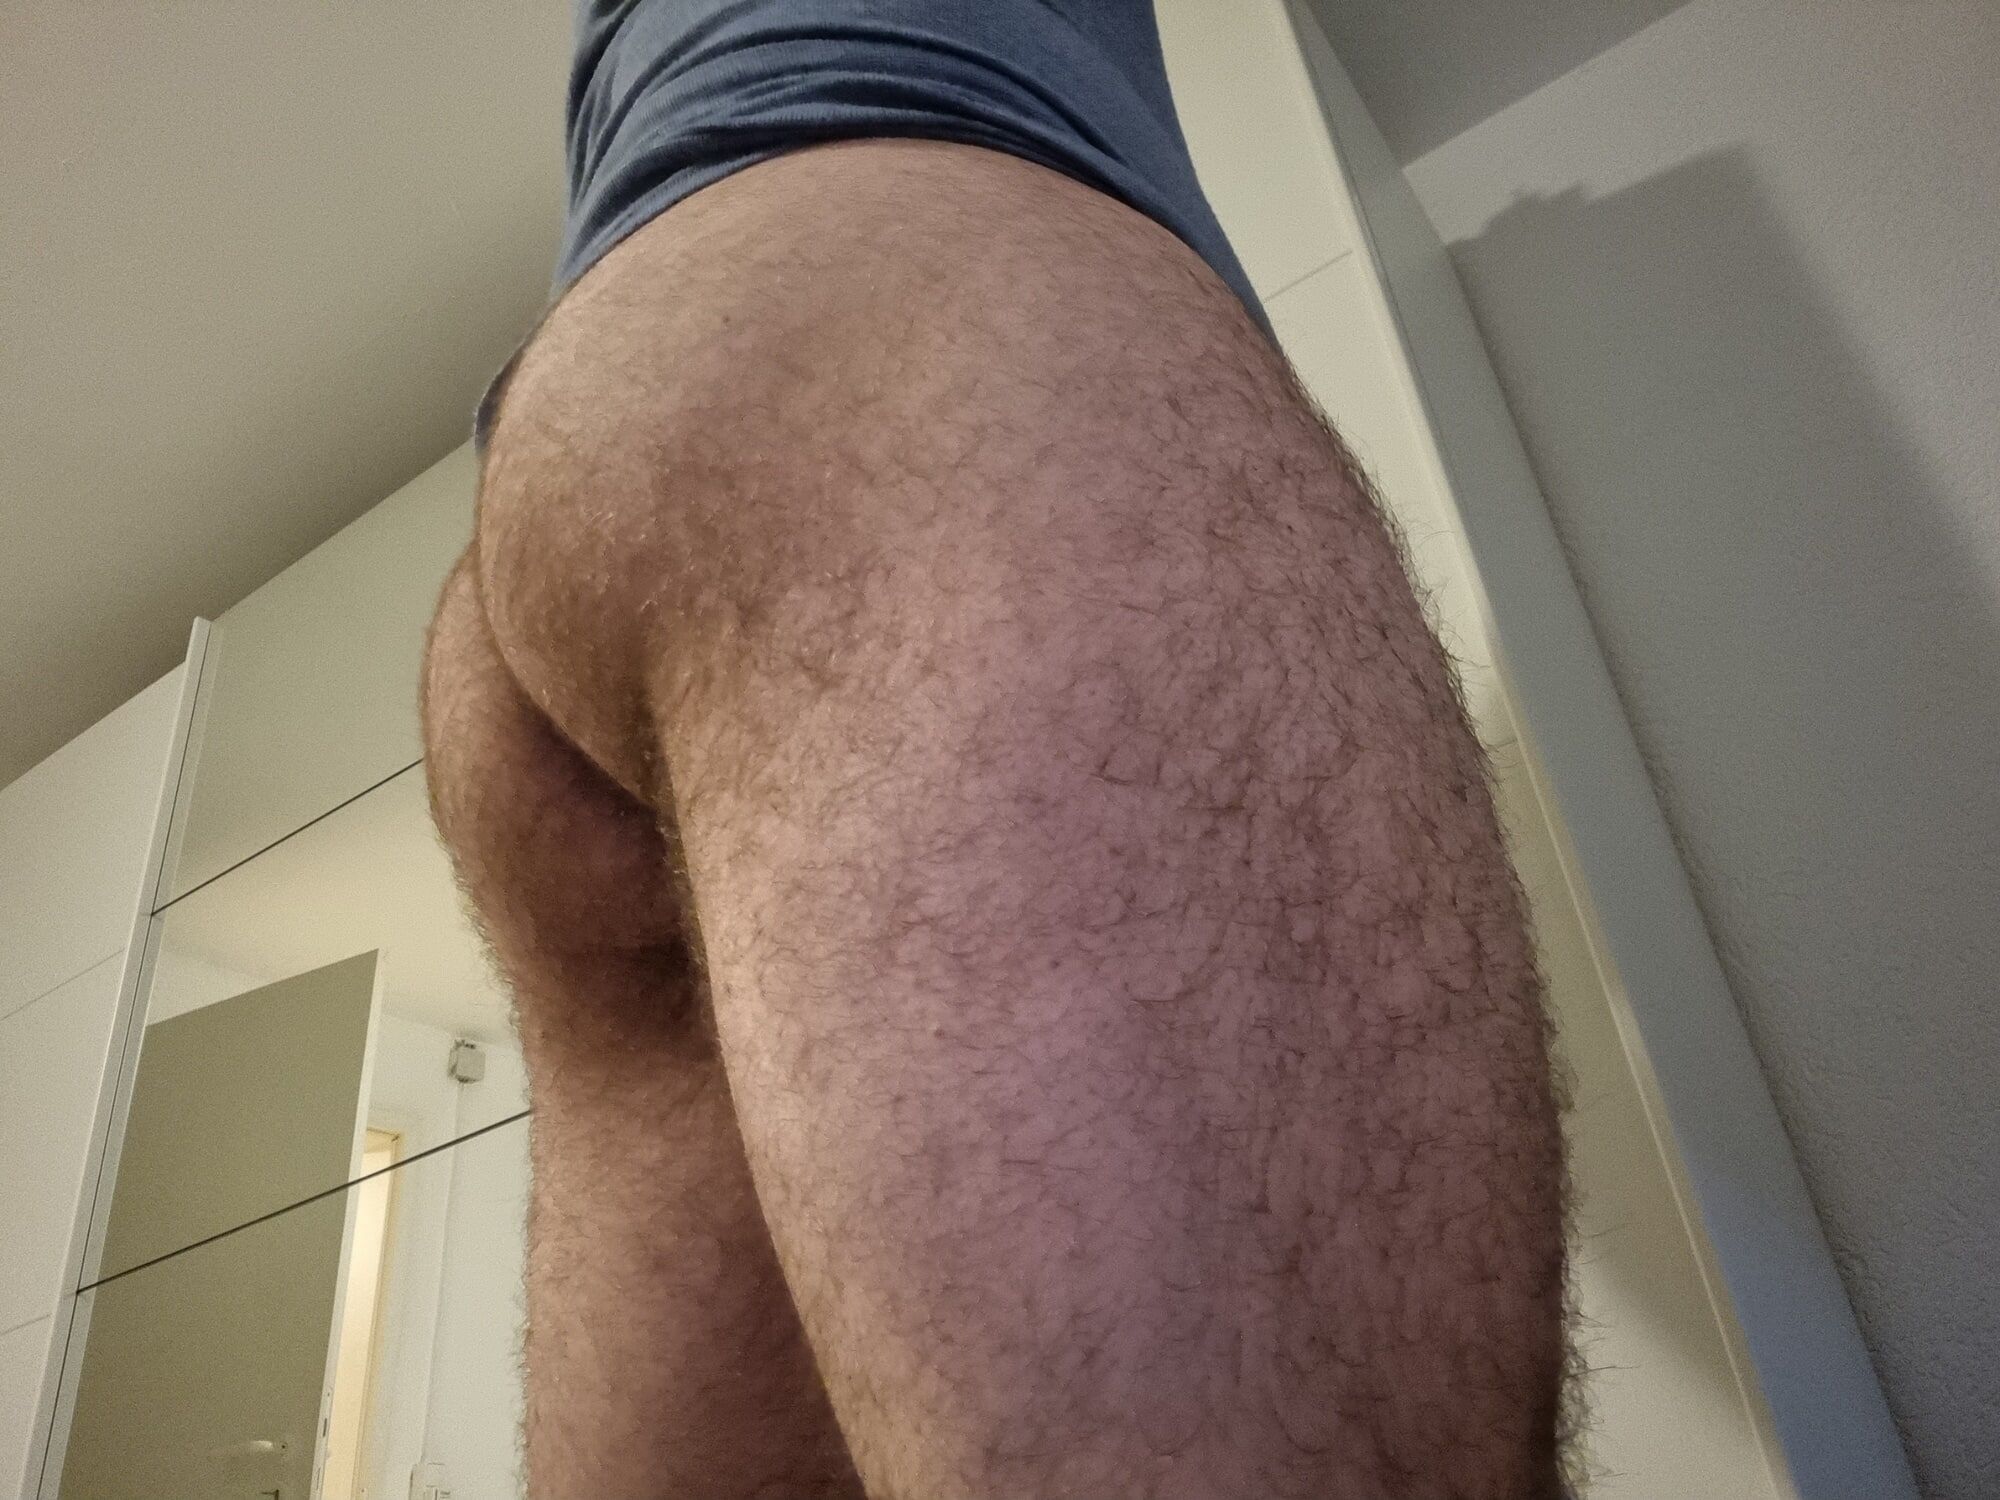 My big ass and legs